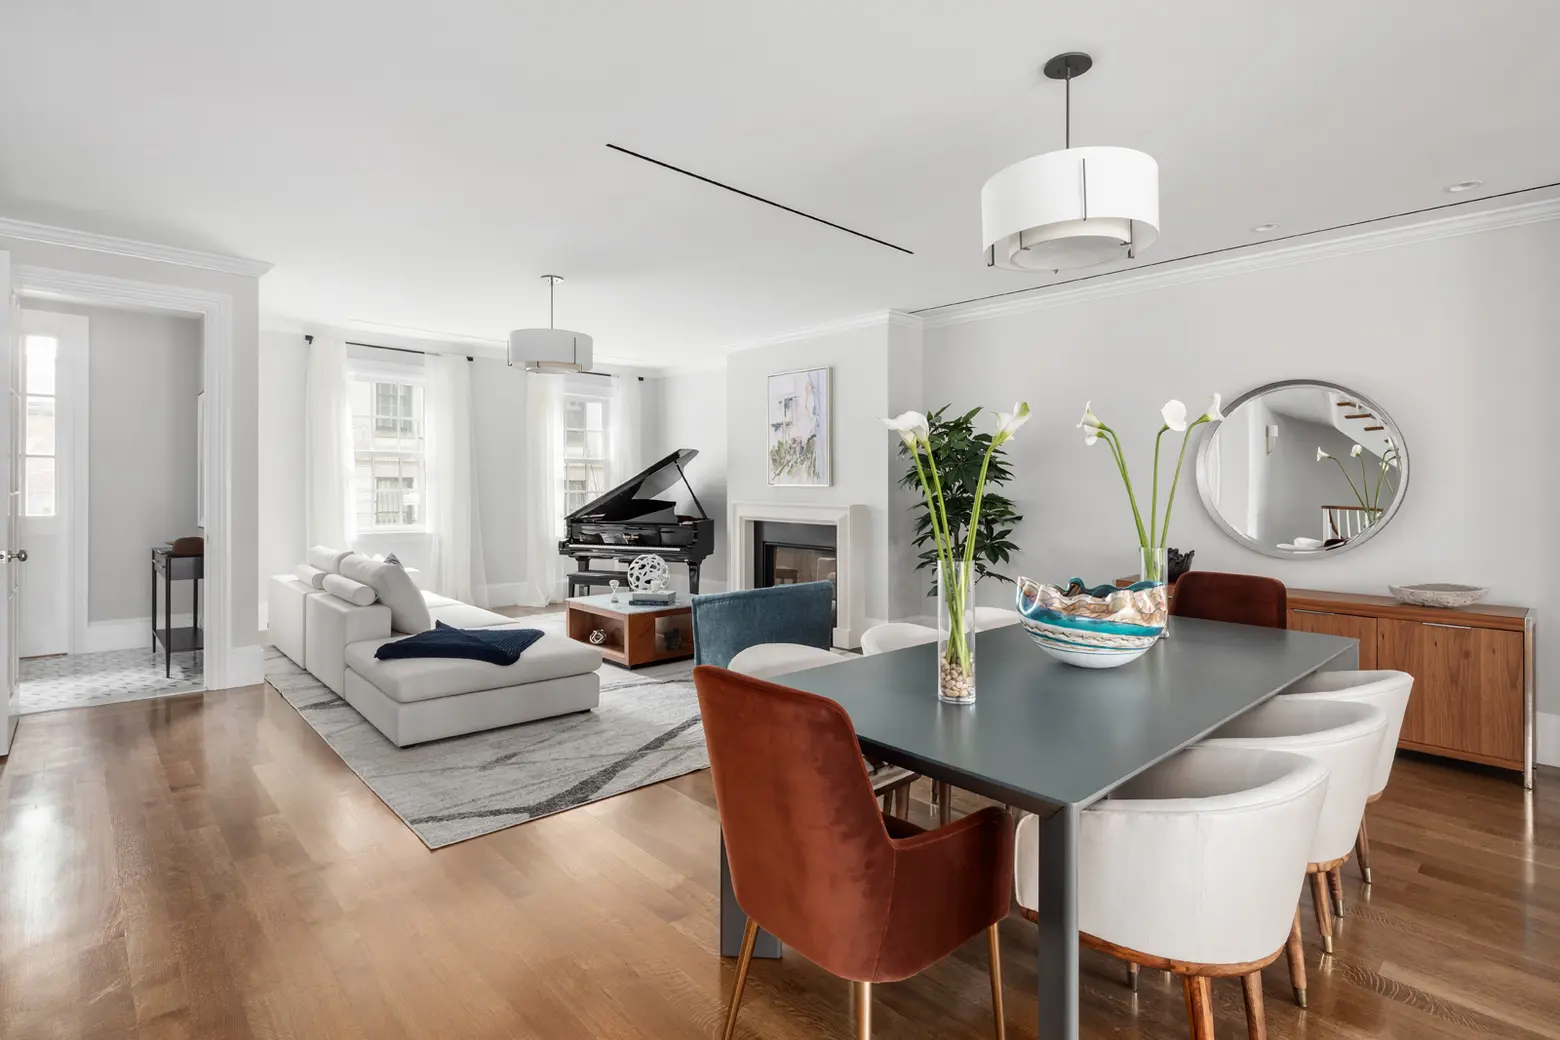 Brooklyn Heights’ third-oldest house, with a gut renovation, is asking $10M